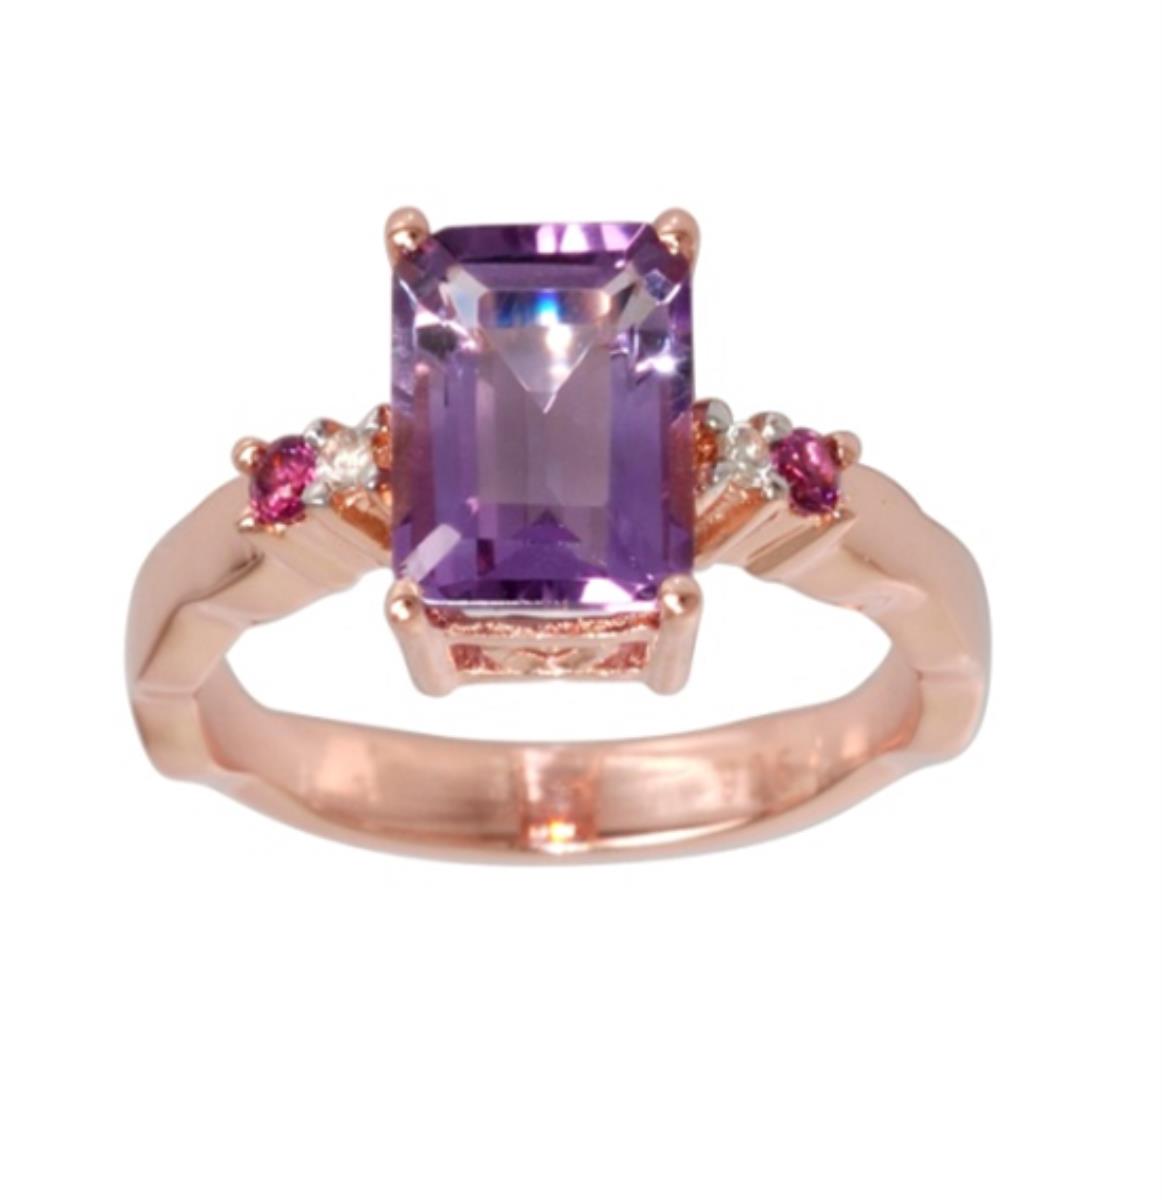 10K Rose Gold 9x7mm Emerald Cut Pink Amethyst with White Zircon+Rhodolite Sides Eng Ring